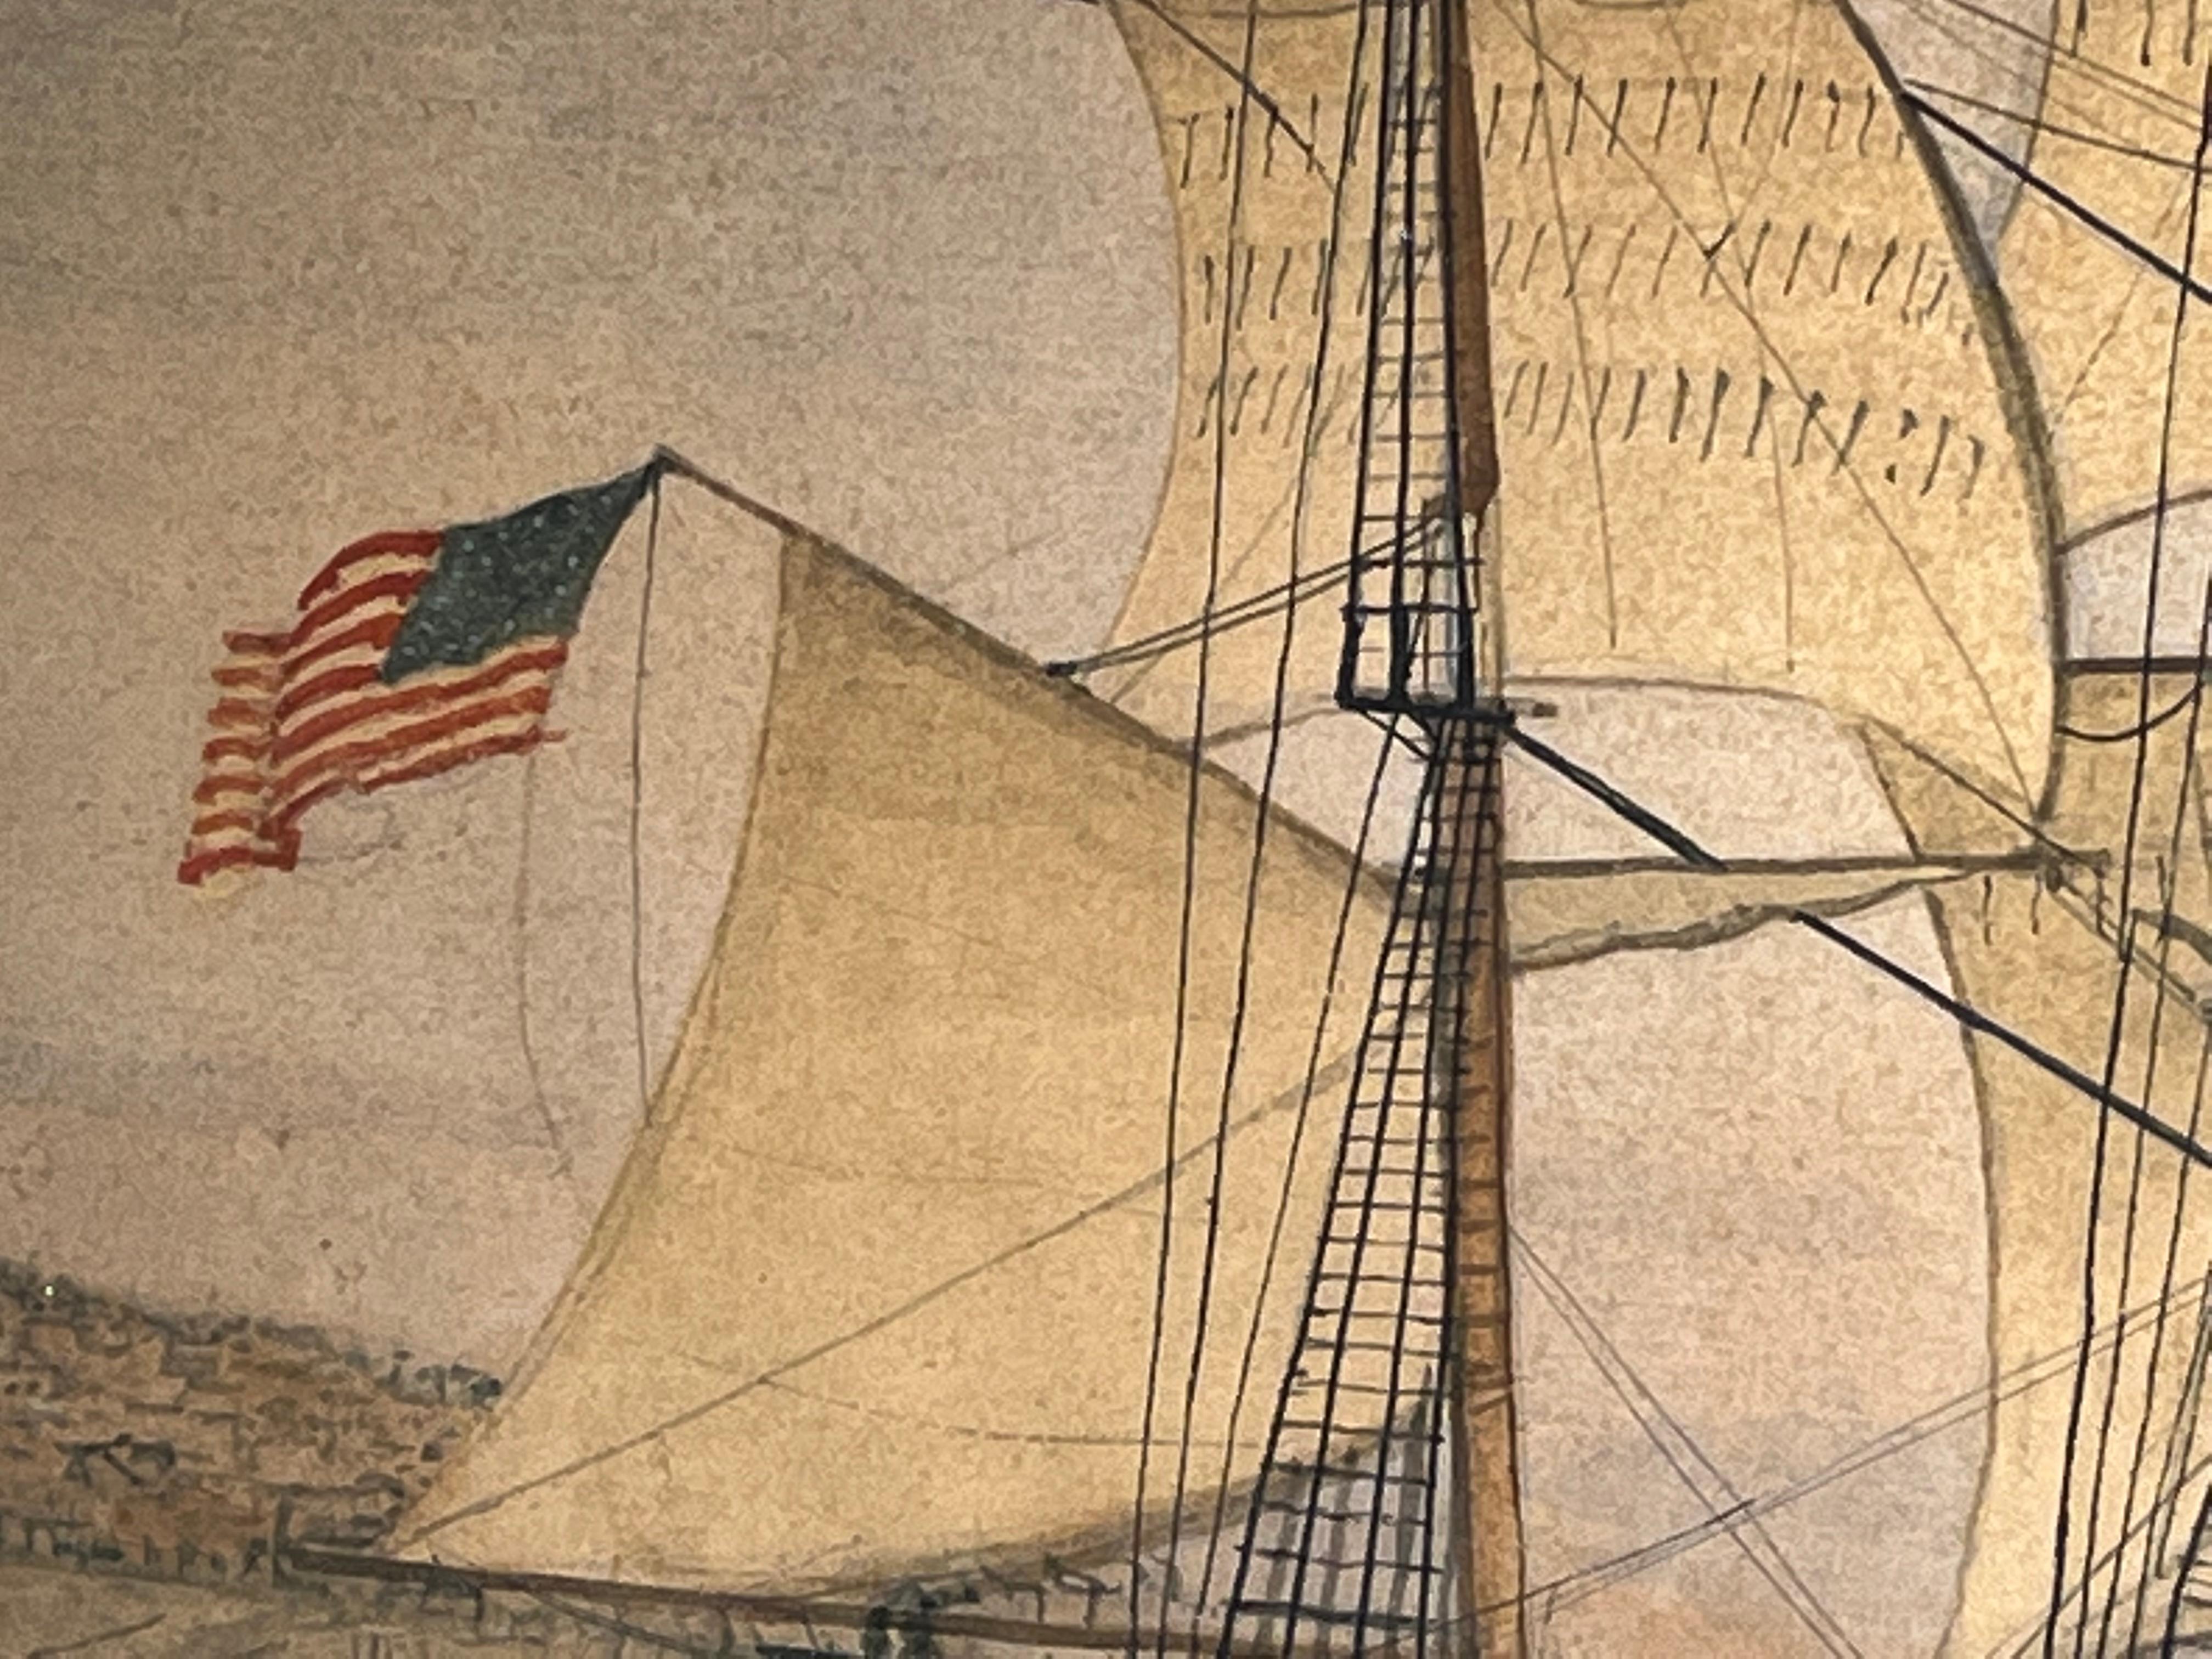 Hand-Painted 19th C. Ship Painting, “Volunteer”